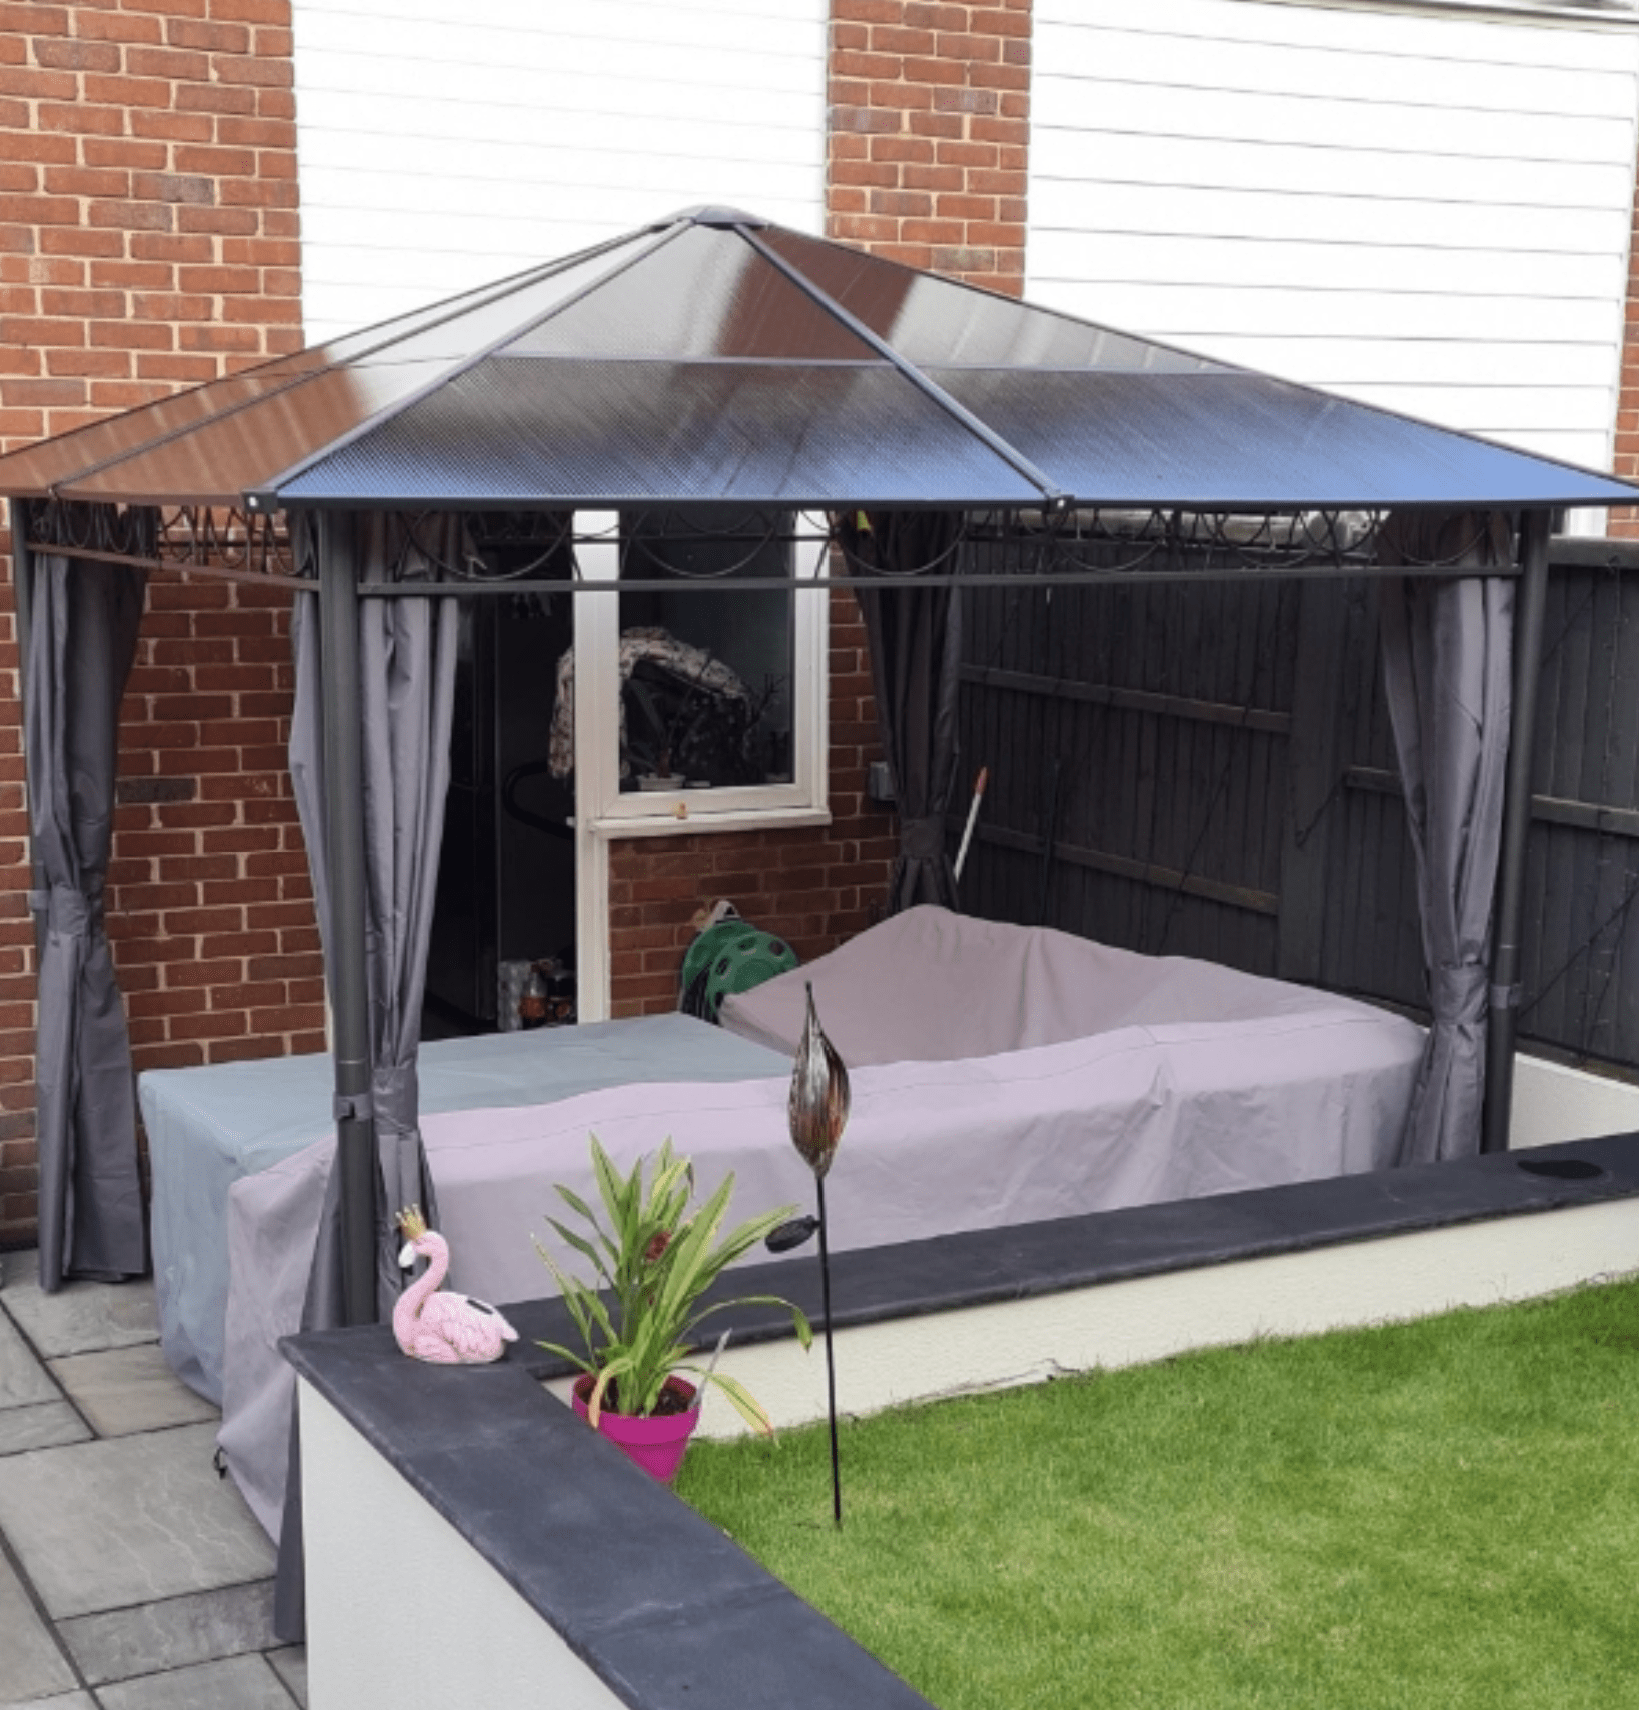 Grey 3 x 3m Hardtop Gazebo with UV Resistant Polycarbonate Roof - Trade Warehouse